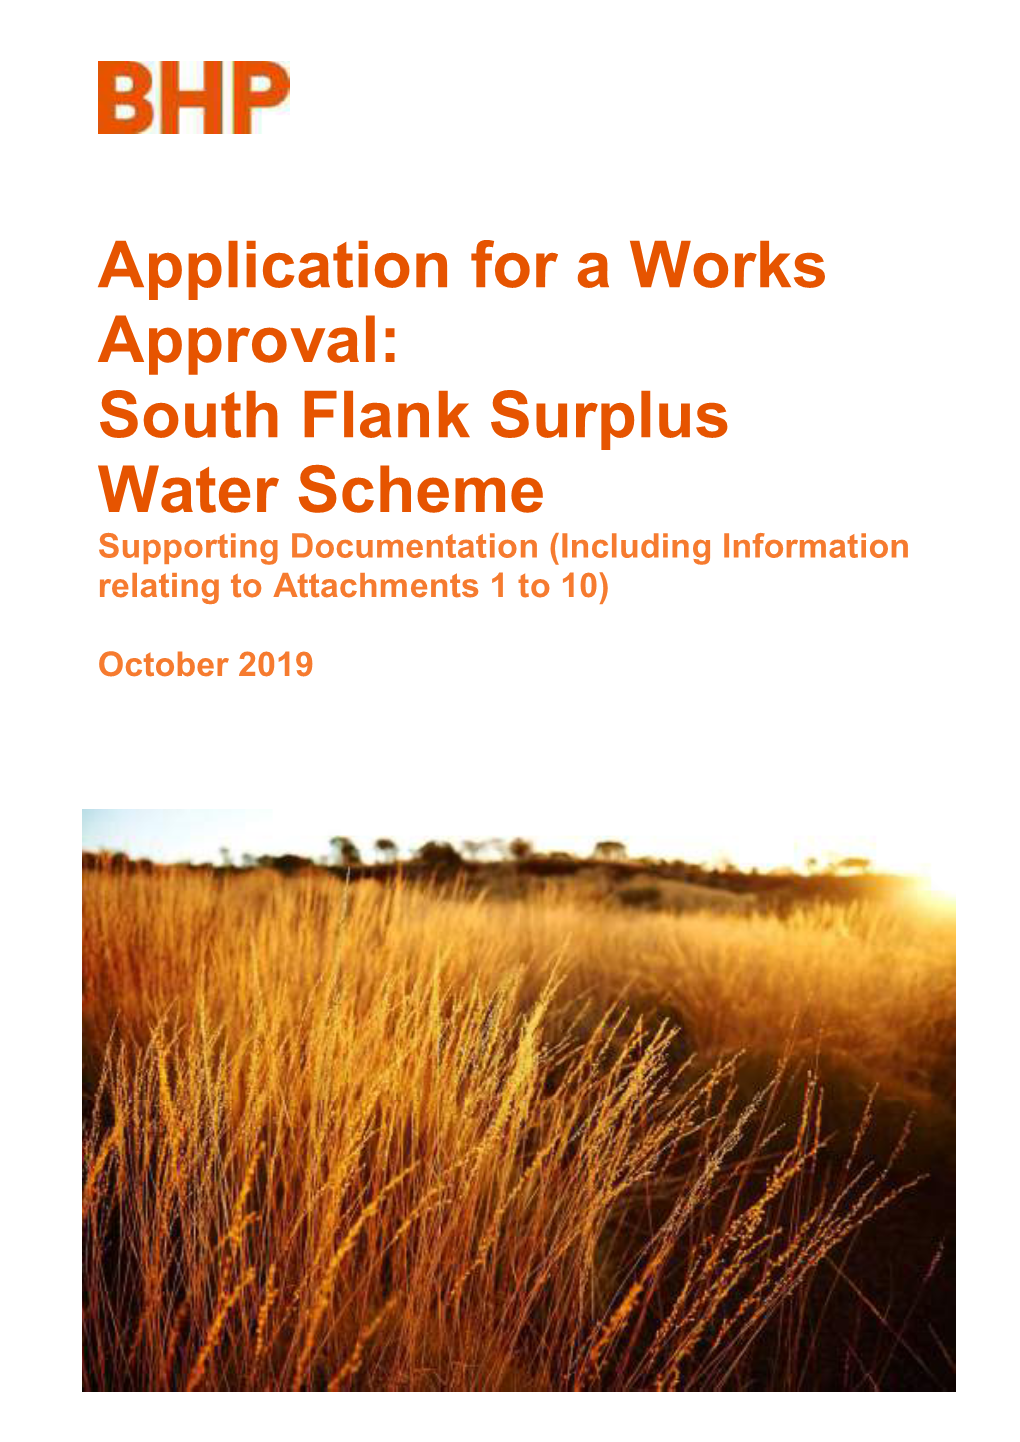 Application for a Works Approval: South Flank Surplus Water Scheme Supporting Documentation (Including Information Relating to Attachments 1 to 10)